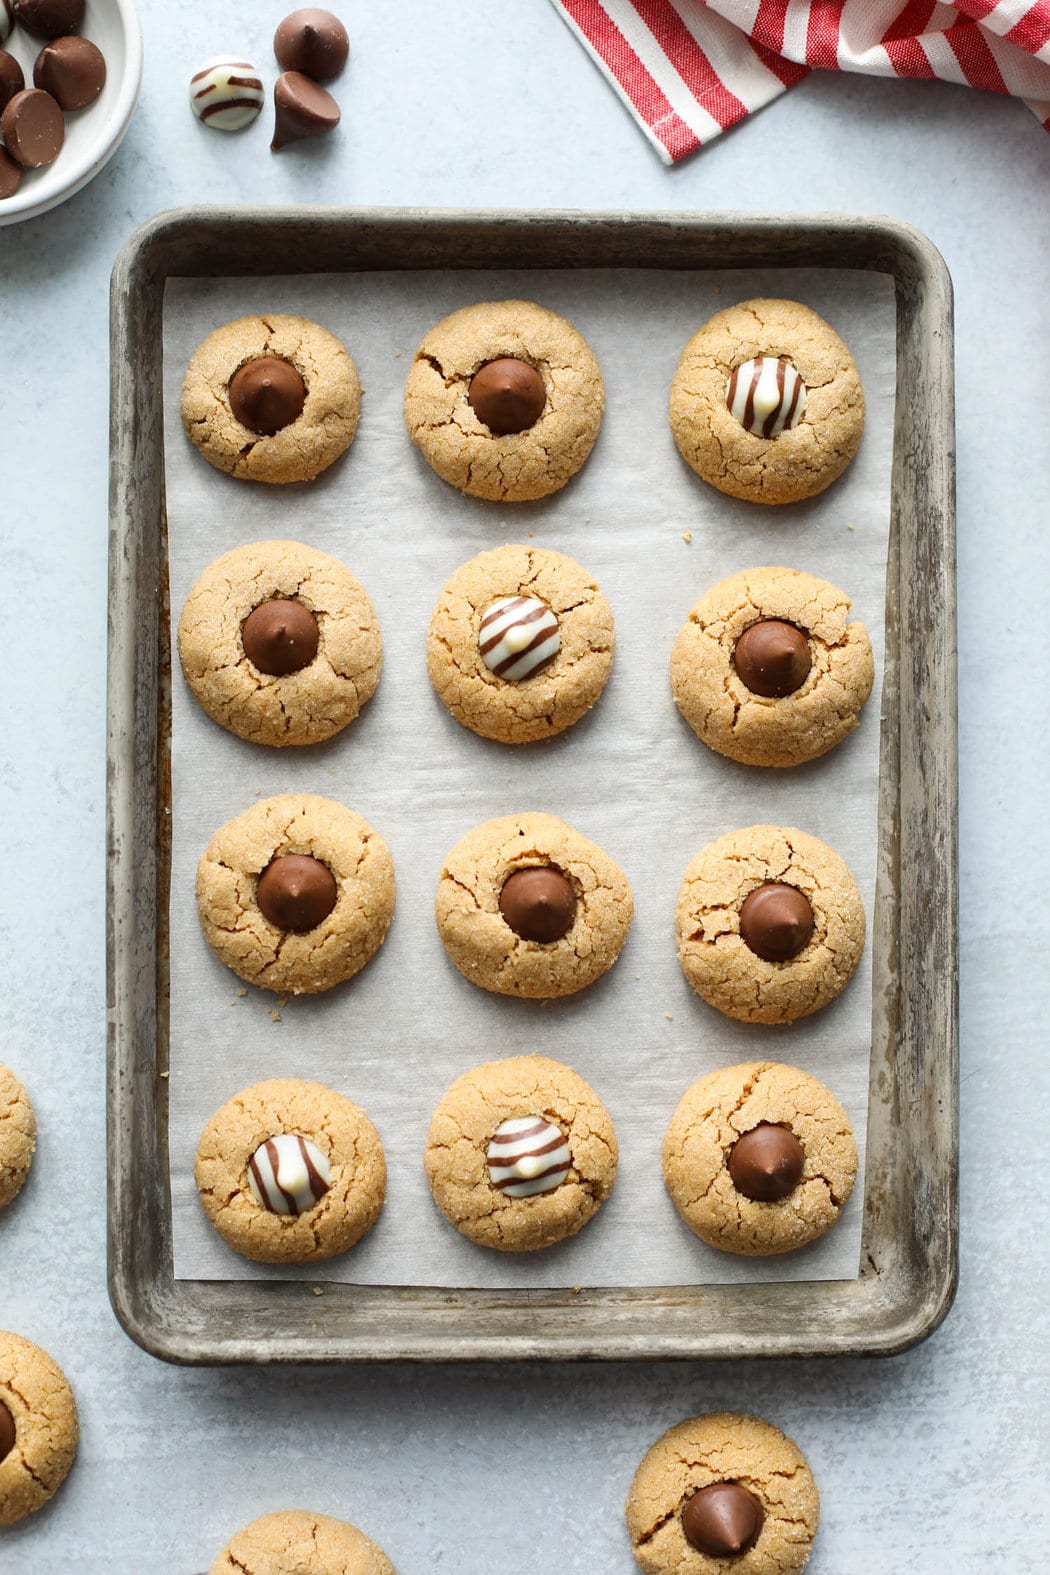 https://therealfooddietitians.com/wp-content/uploads/2022/12/Peanut-Blossom-Cookies-16-of-24.jpg